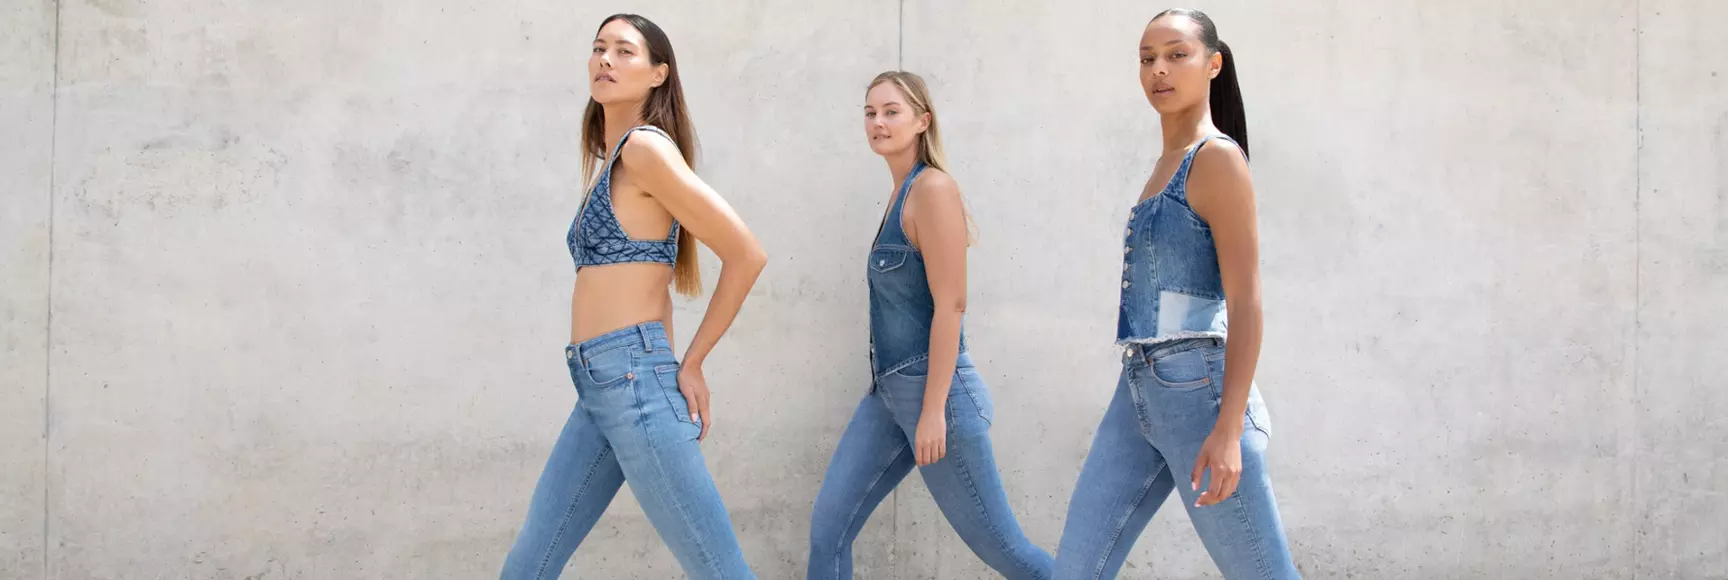 A trio of models walking are showcasing stretch denim jeans with LYCRA® ADAPTIV fiber that adapt to fit different body types.